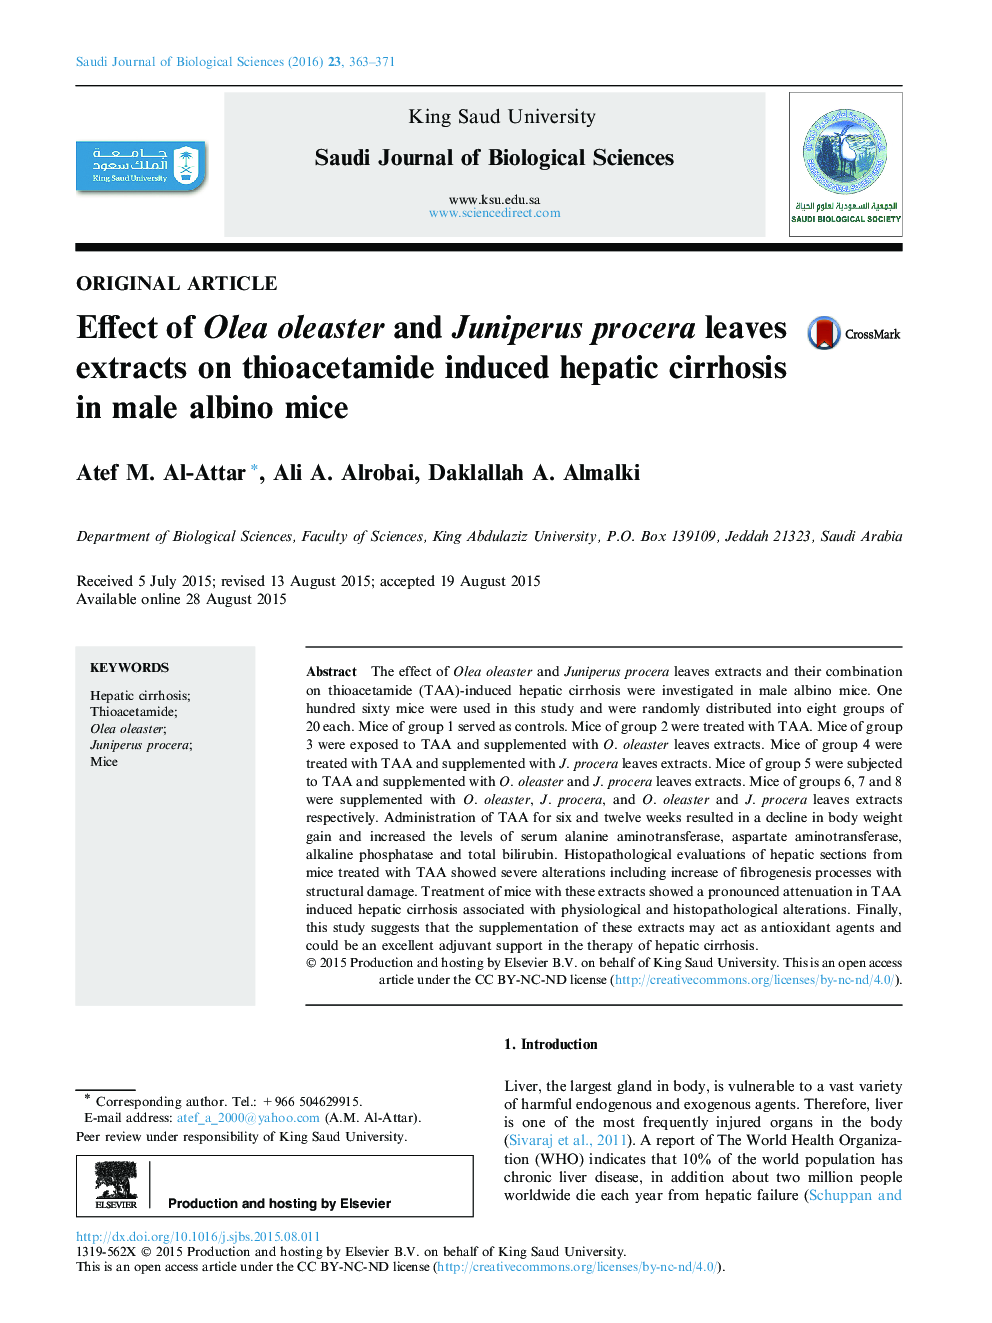 Effect of Olea oleaster and Juniperus procera leaves extracts on thioacetamide induced hepatic cirrhosis in male albino mice 